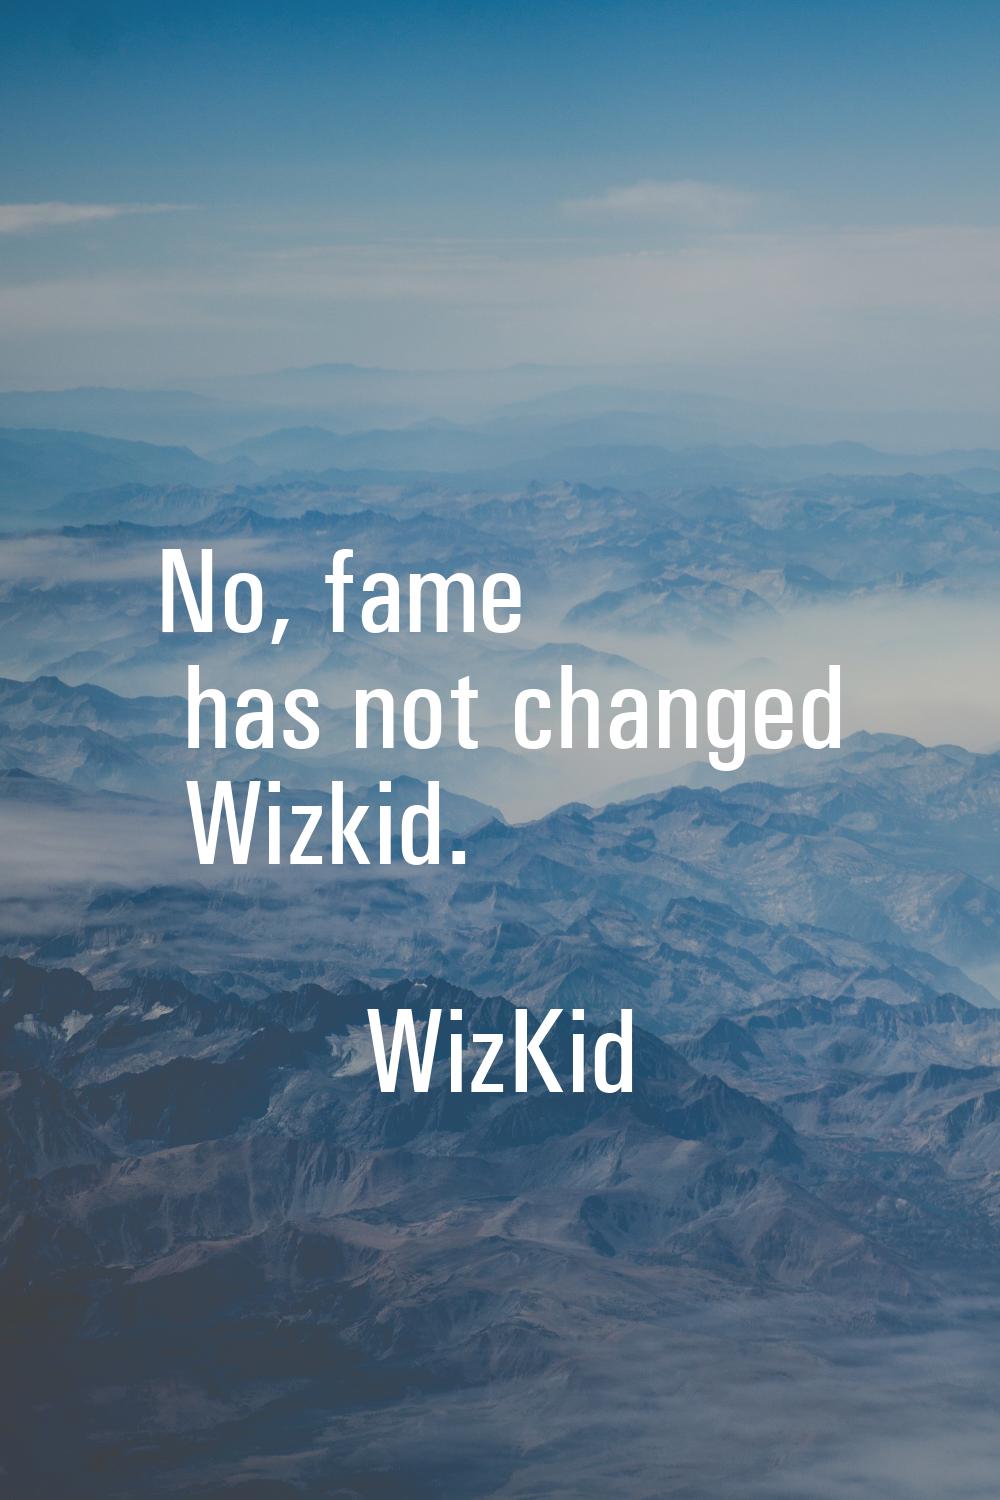 No, fame has not changed Wizkid.